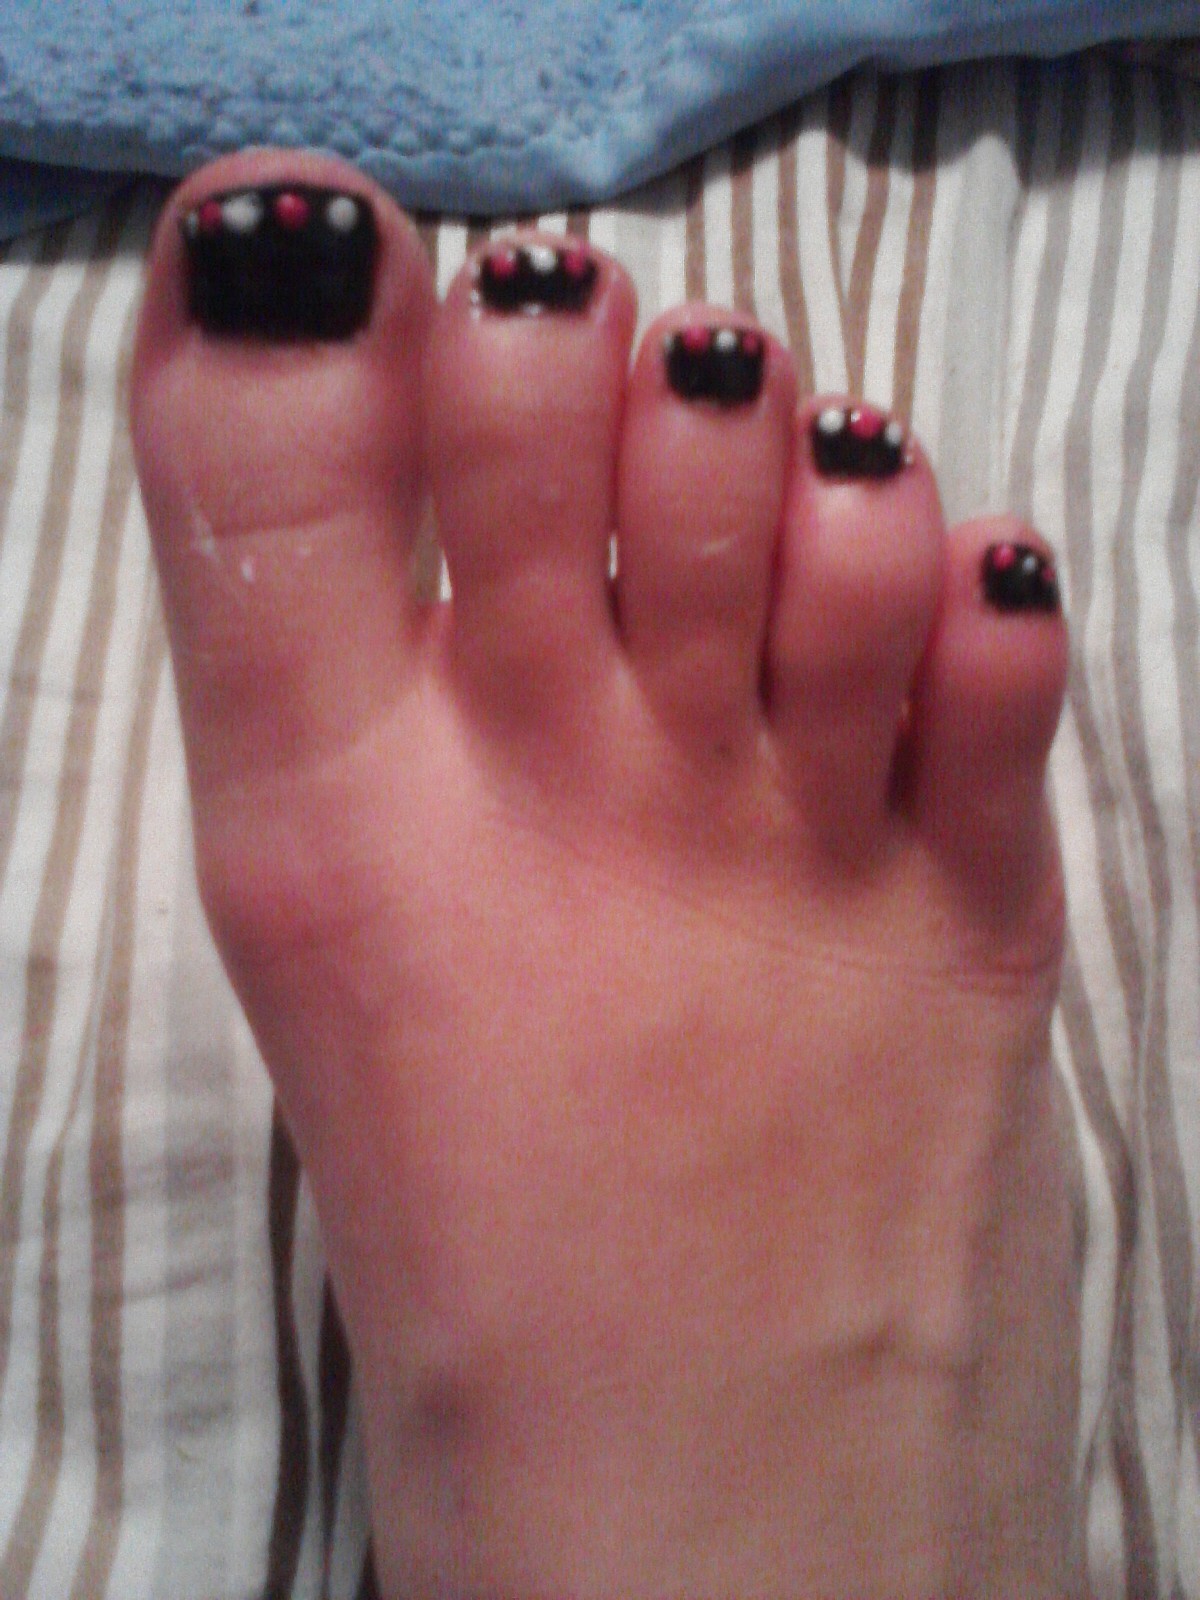 I can't paint my finger nails so I guess I'll just make my toes cute. :)